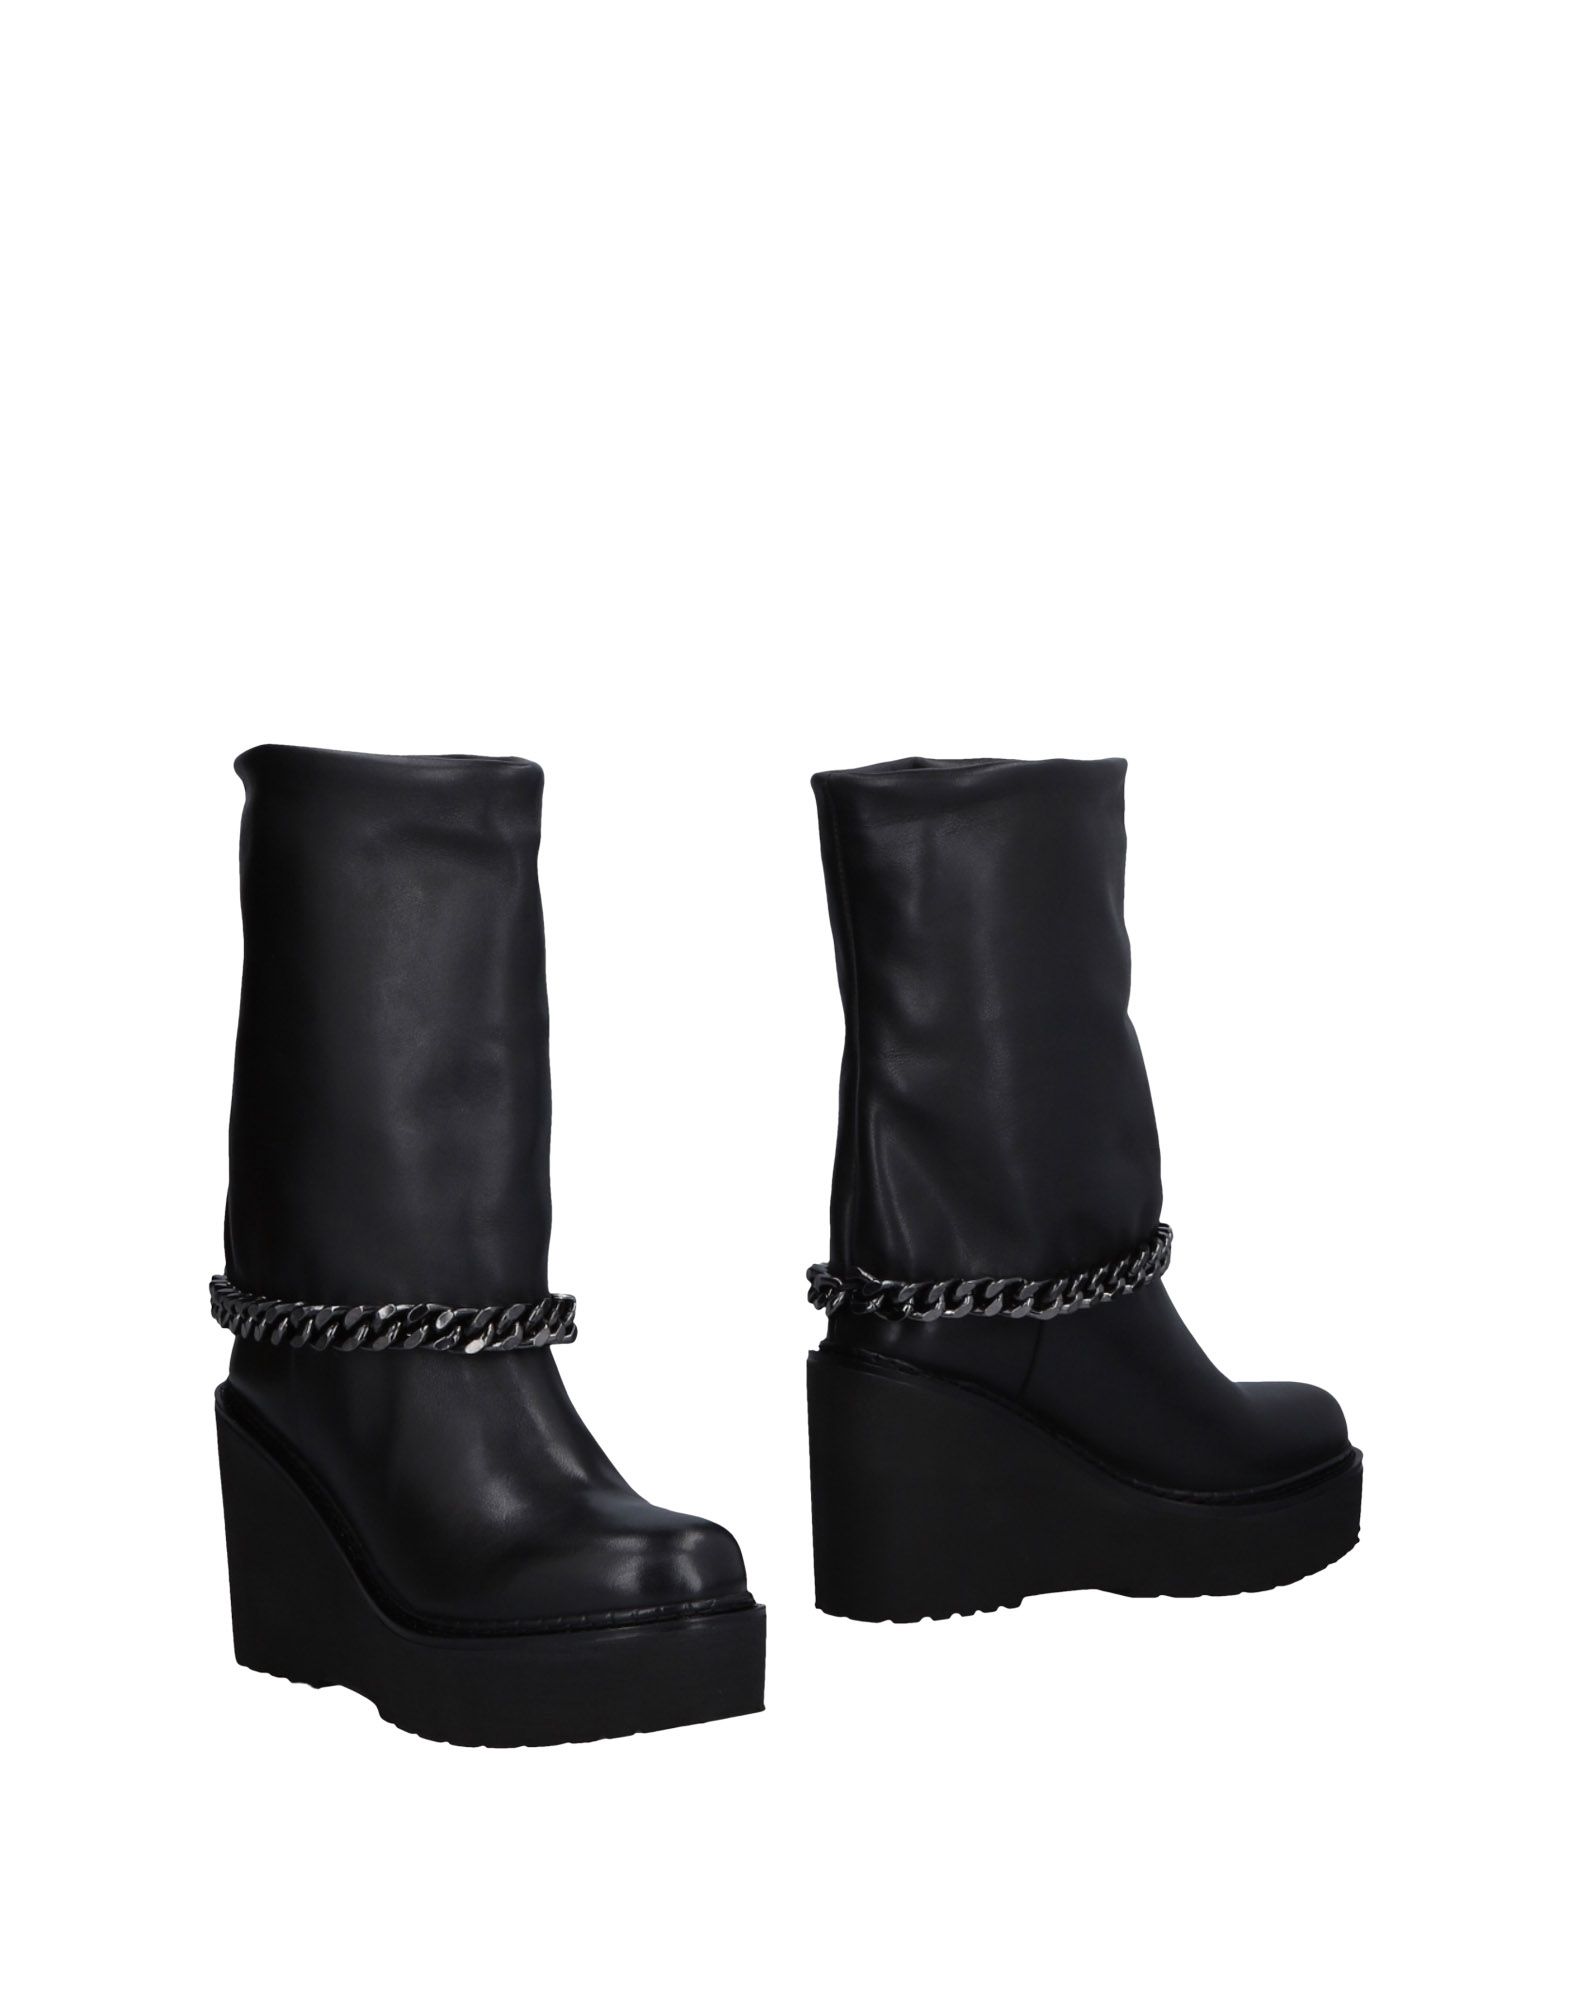 CULT CULT WOMAN ANKLE BOOTS BLACK SIZE 8 SOFT LEATHER,11473868PG 11